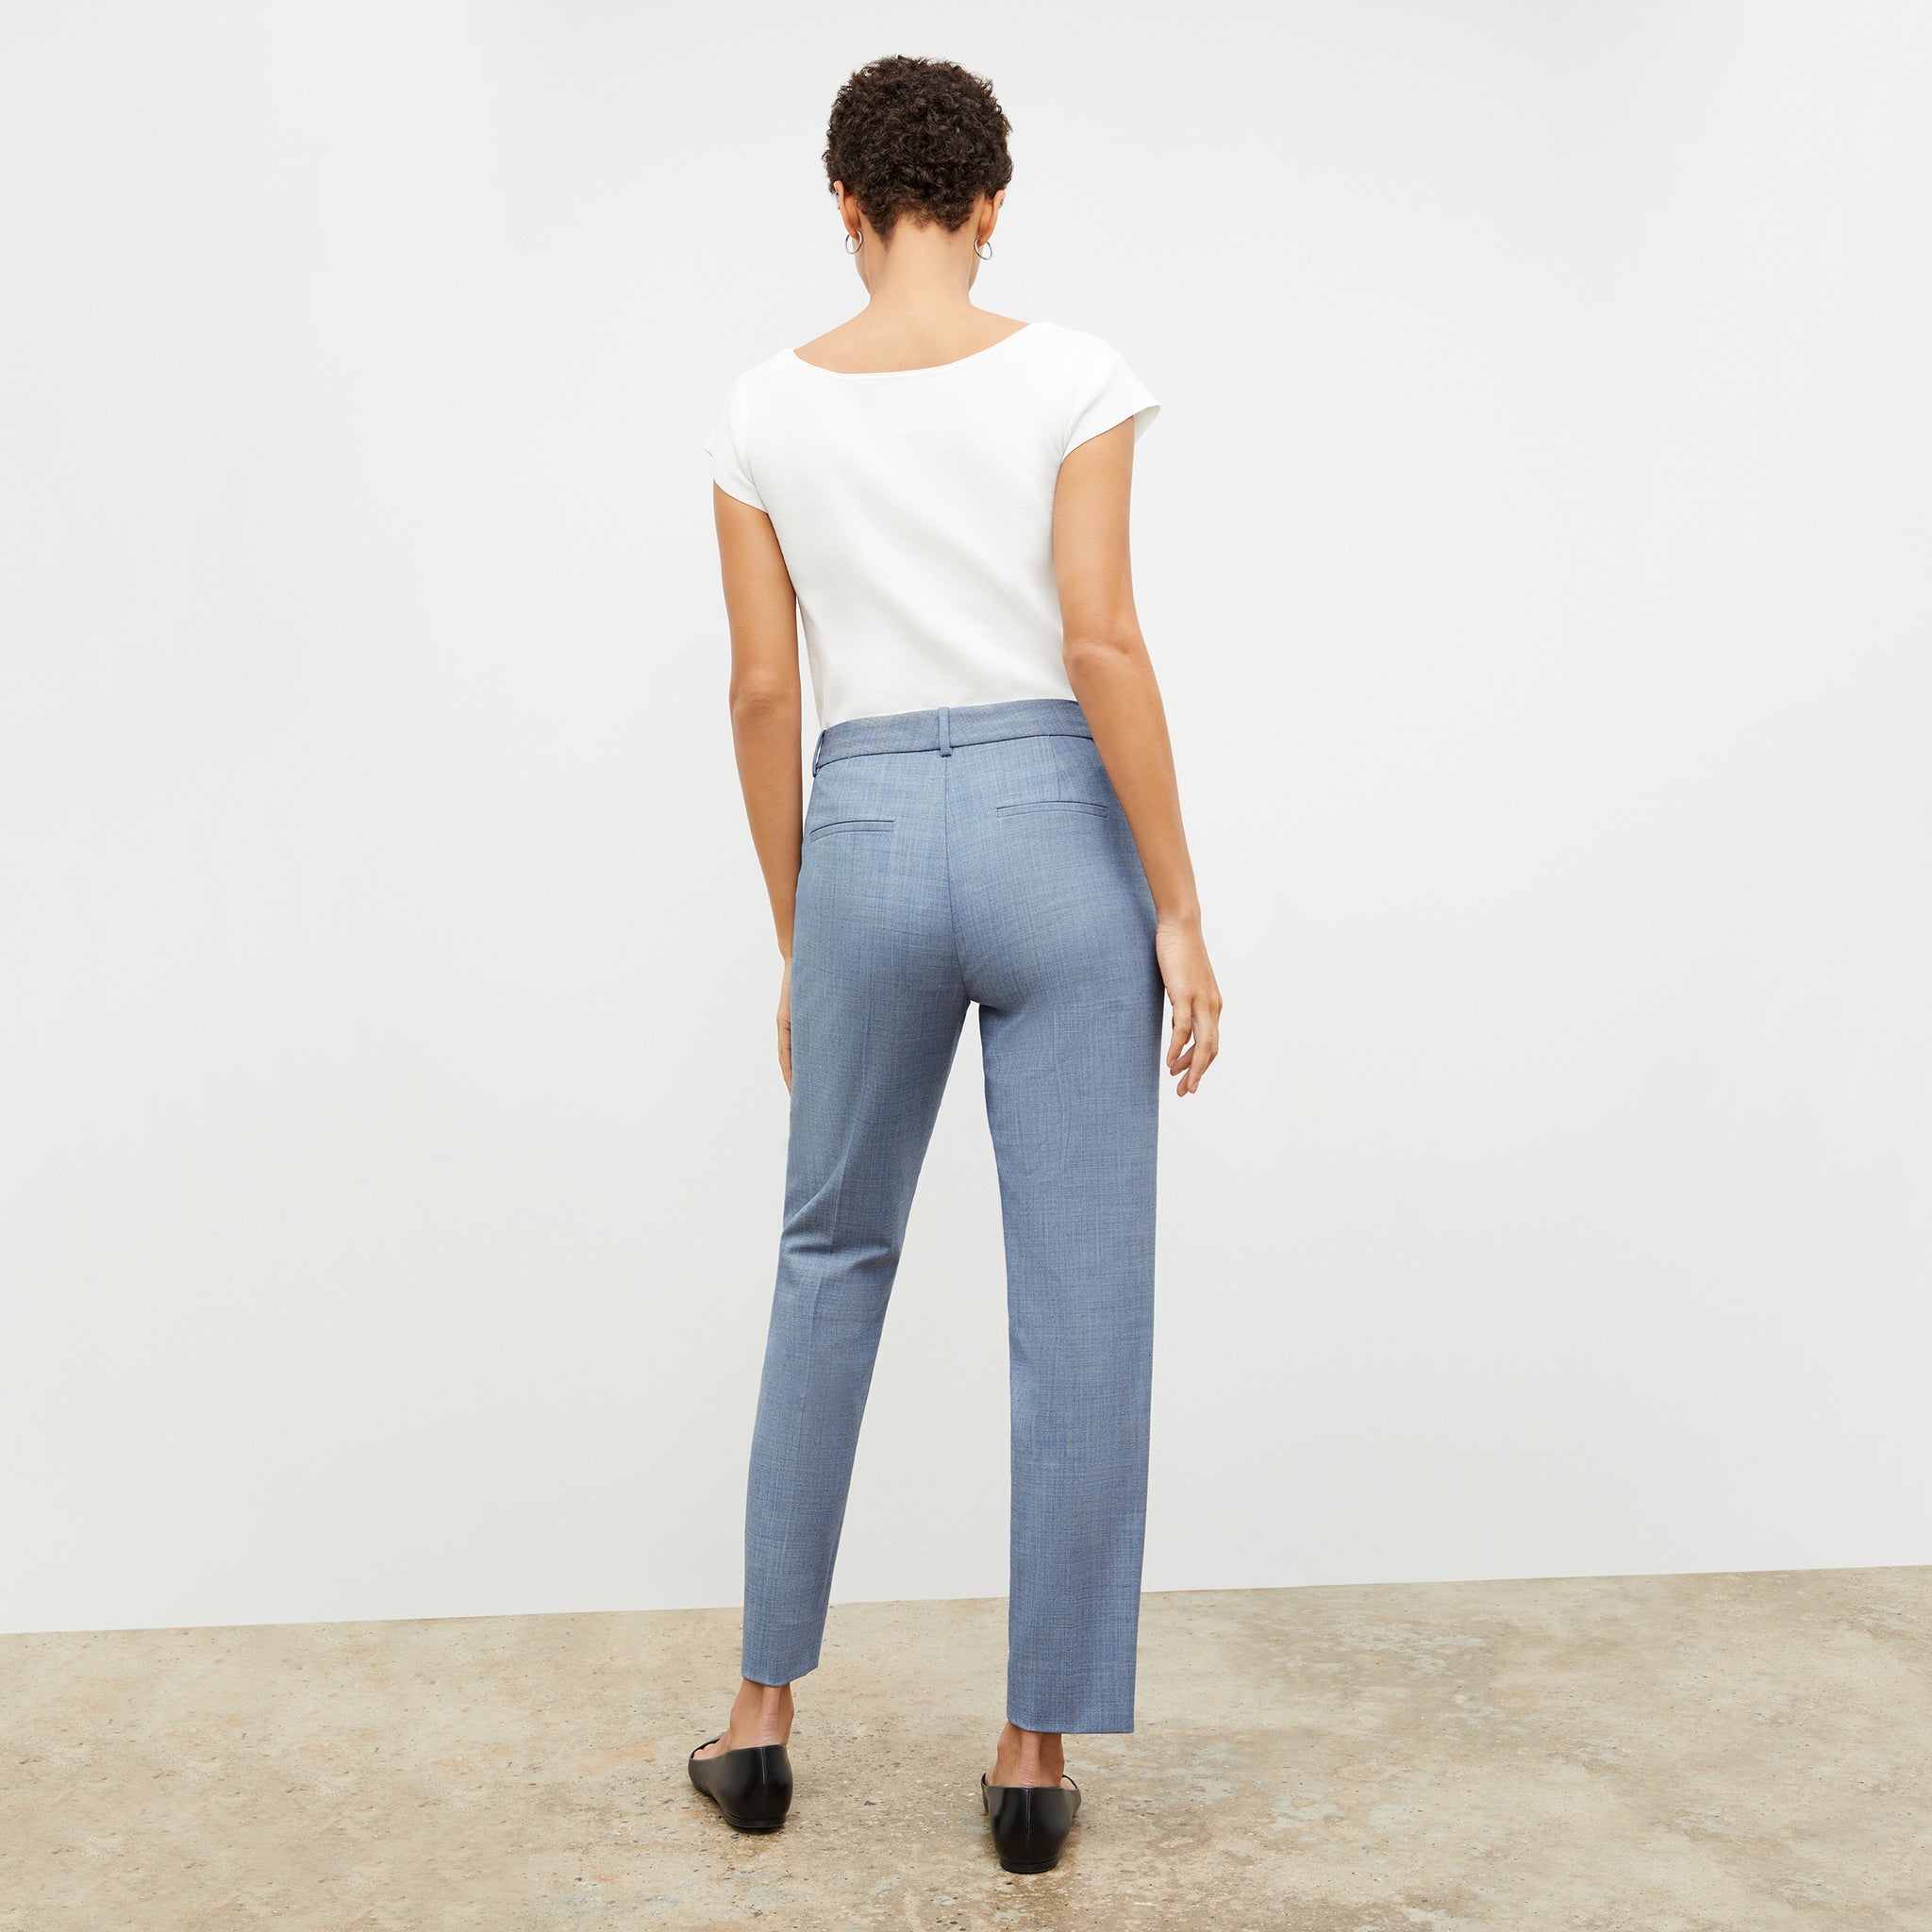 Back image of a woman wearing the mejia pant in indigo and white